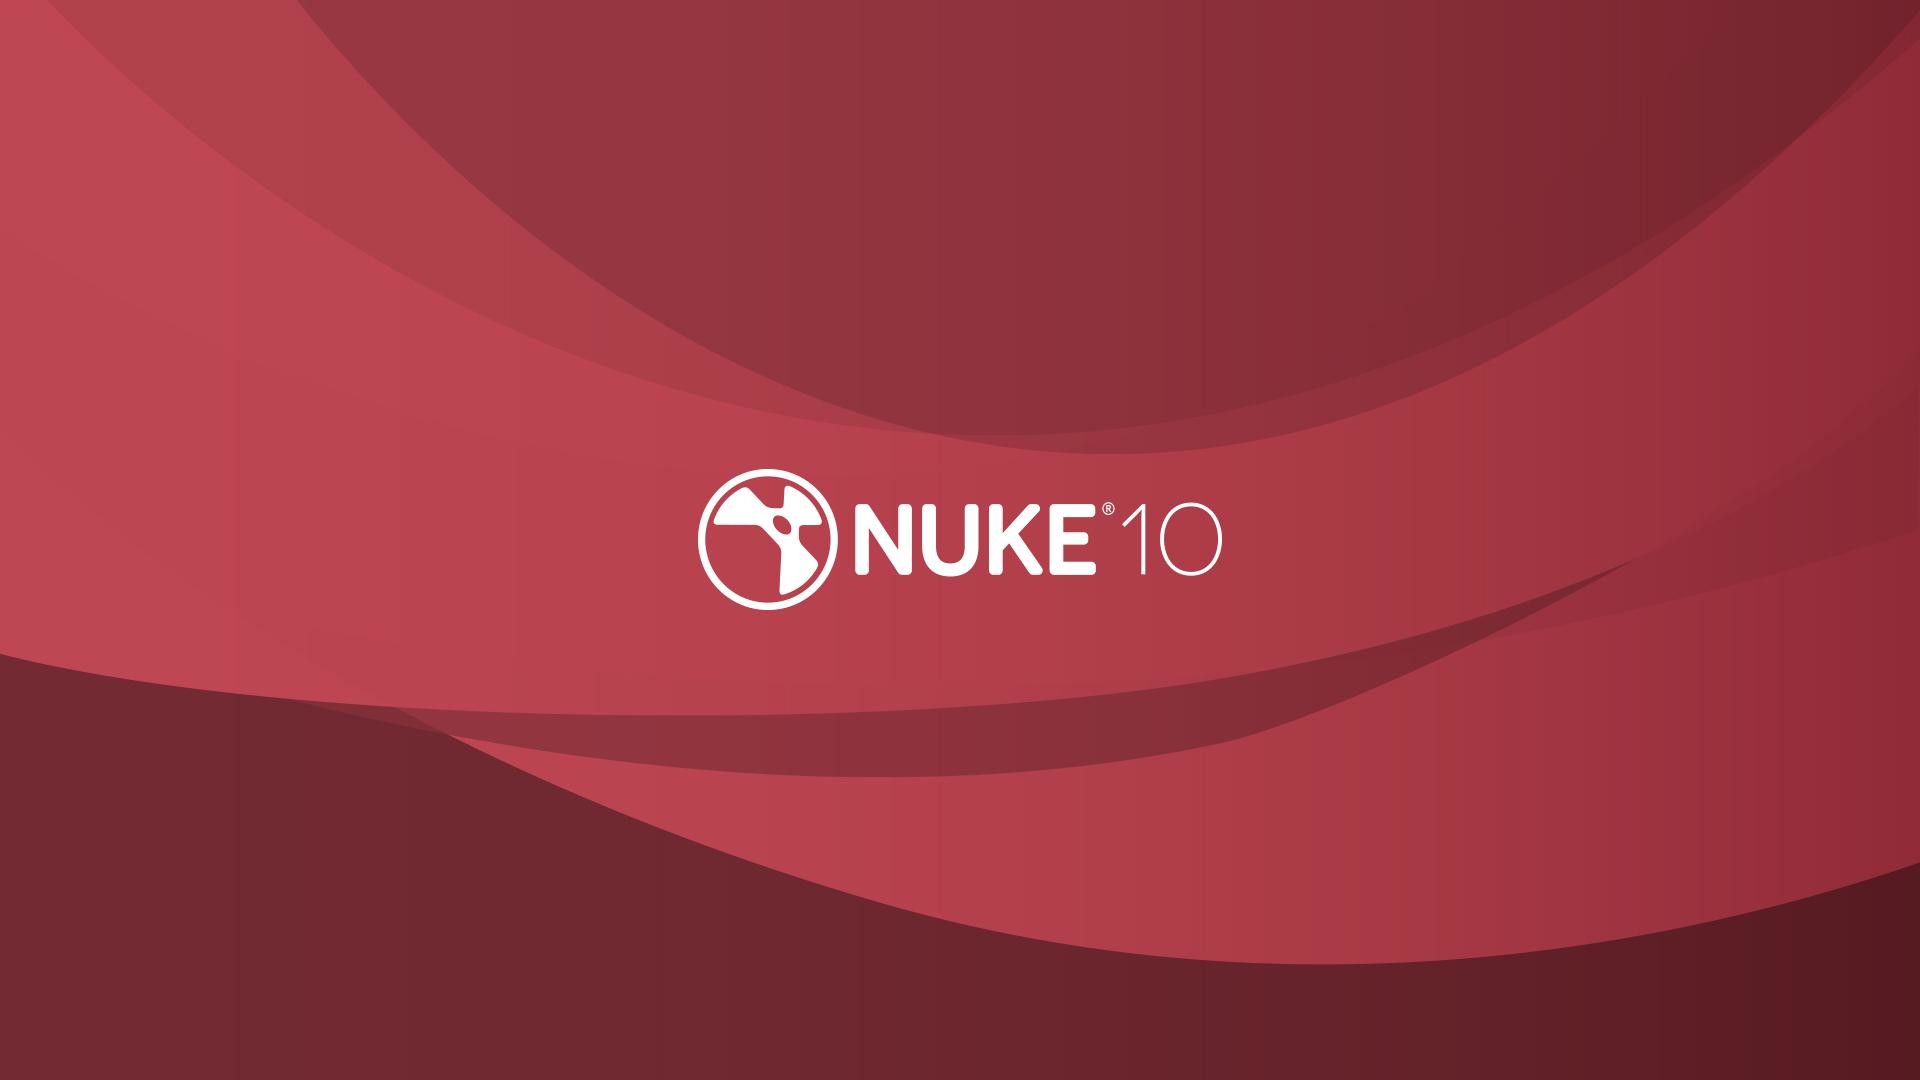 1920x1080 Nuke, high-end compositing and editorial software gets latest release